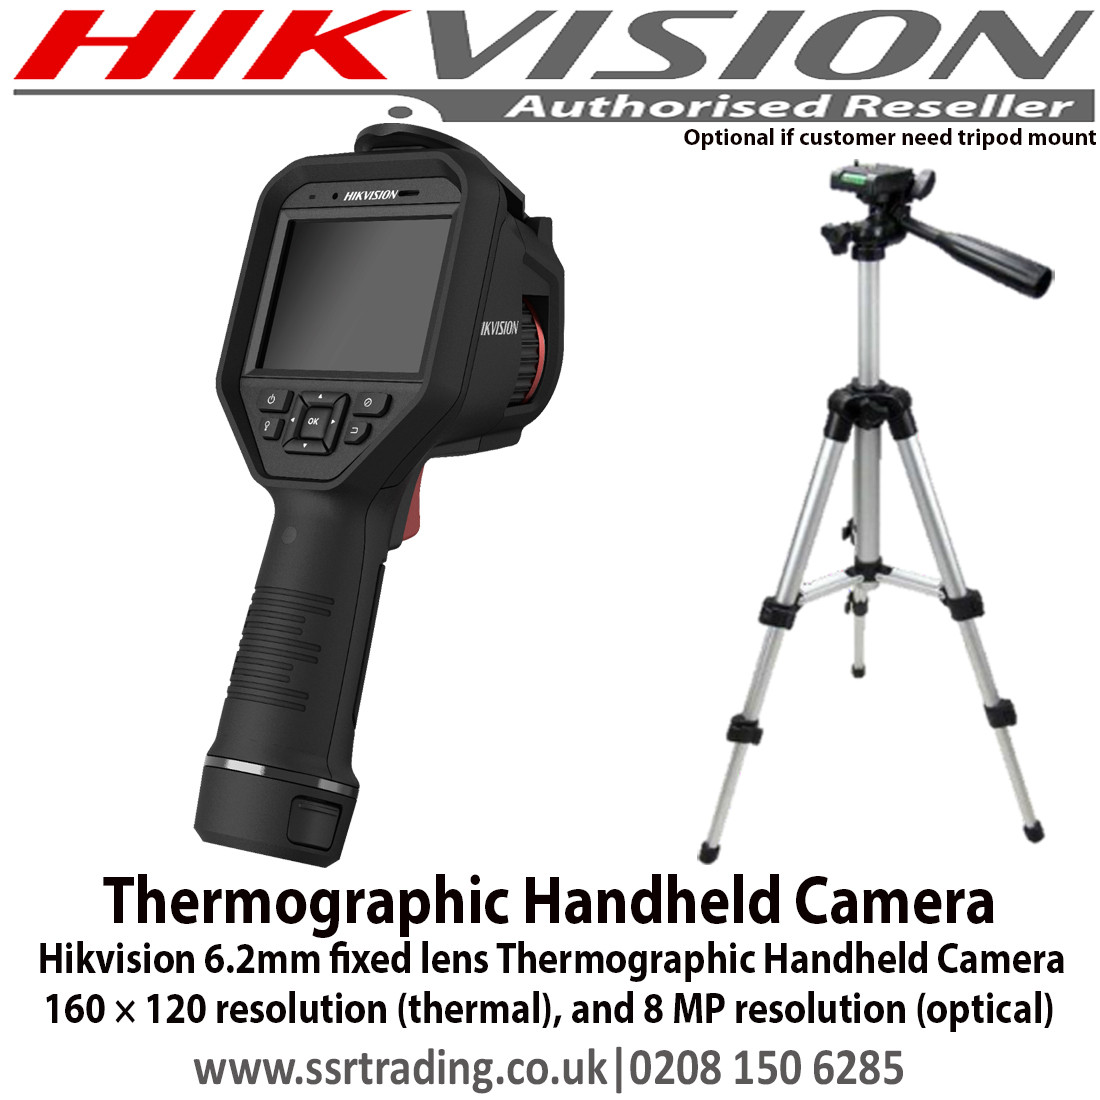 Hikvision DS-2TP21B-6AVF/W 6.2mm fixed lens Thermographic Handheld Camera  kit tripod mount DS-2907ZJ Optional